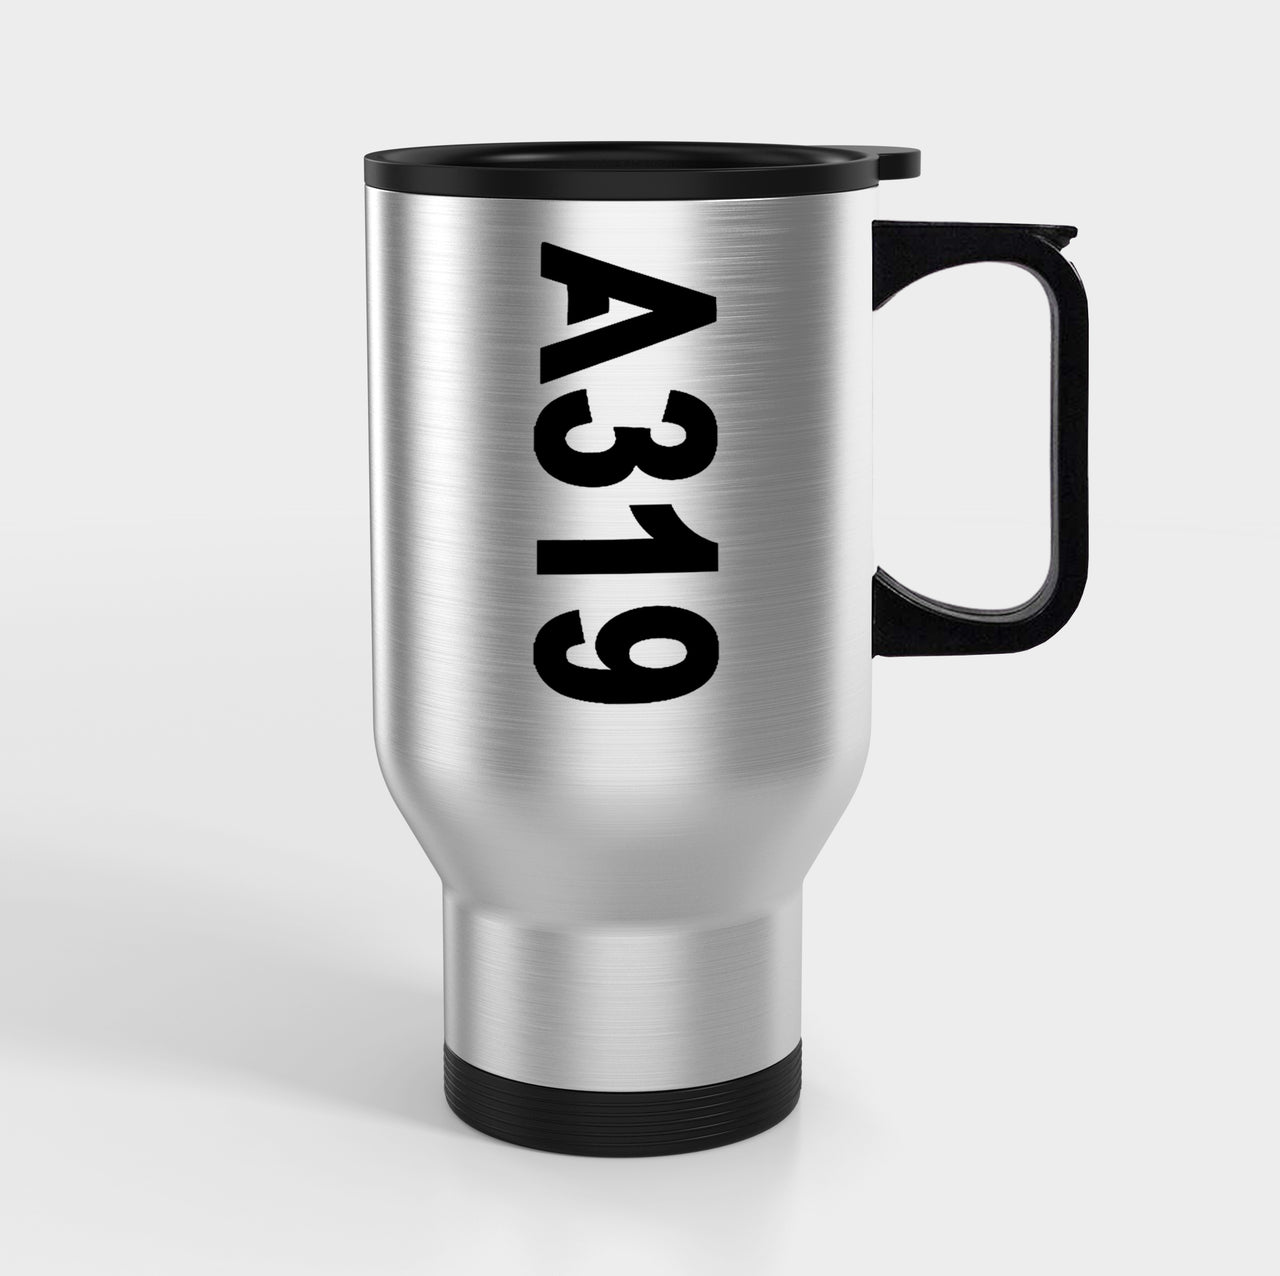 A319 Text Side Designed Travel Mugs (With Holder)